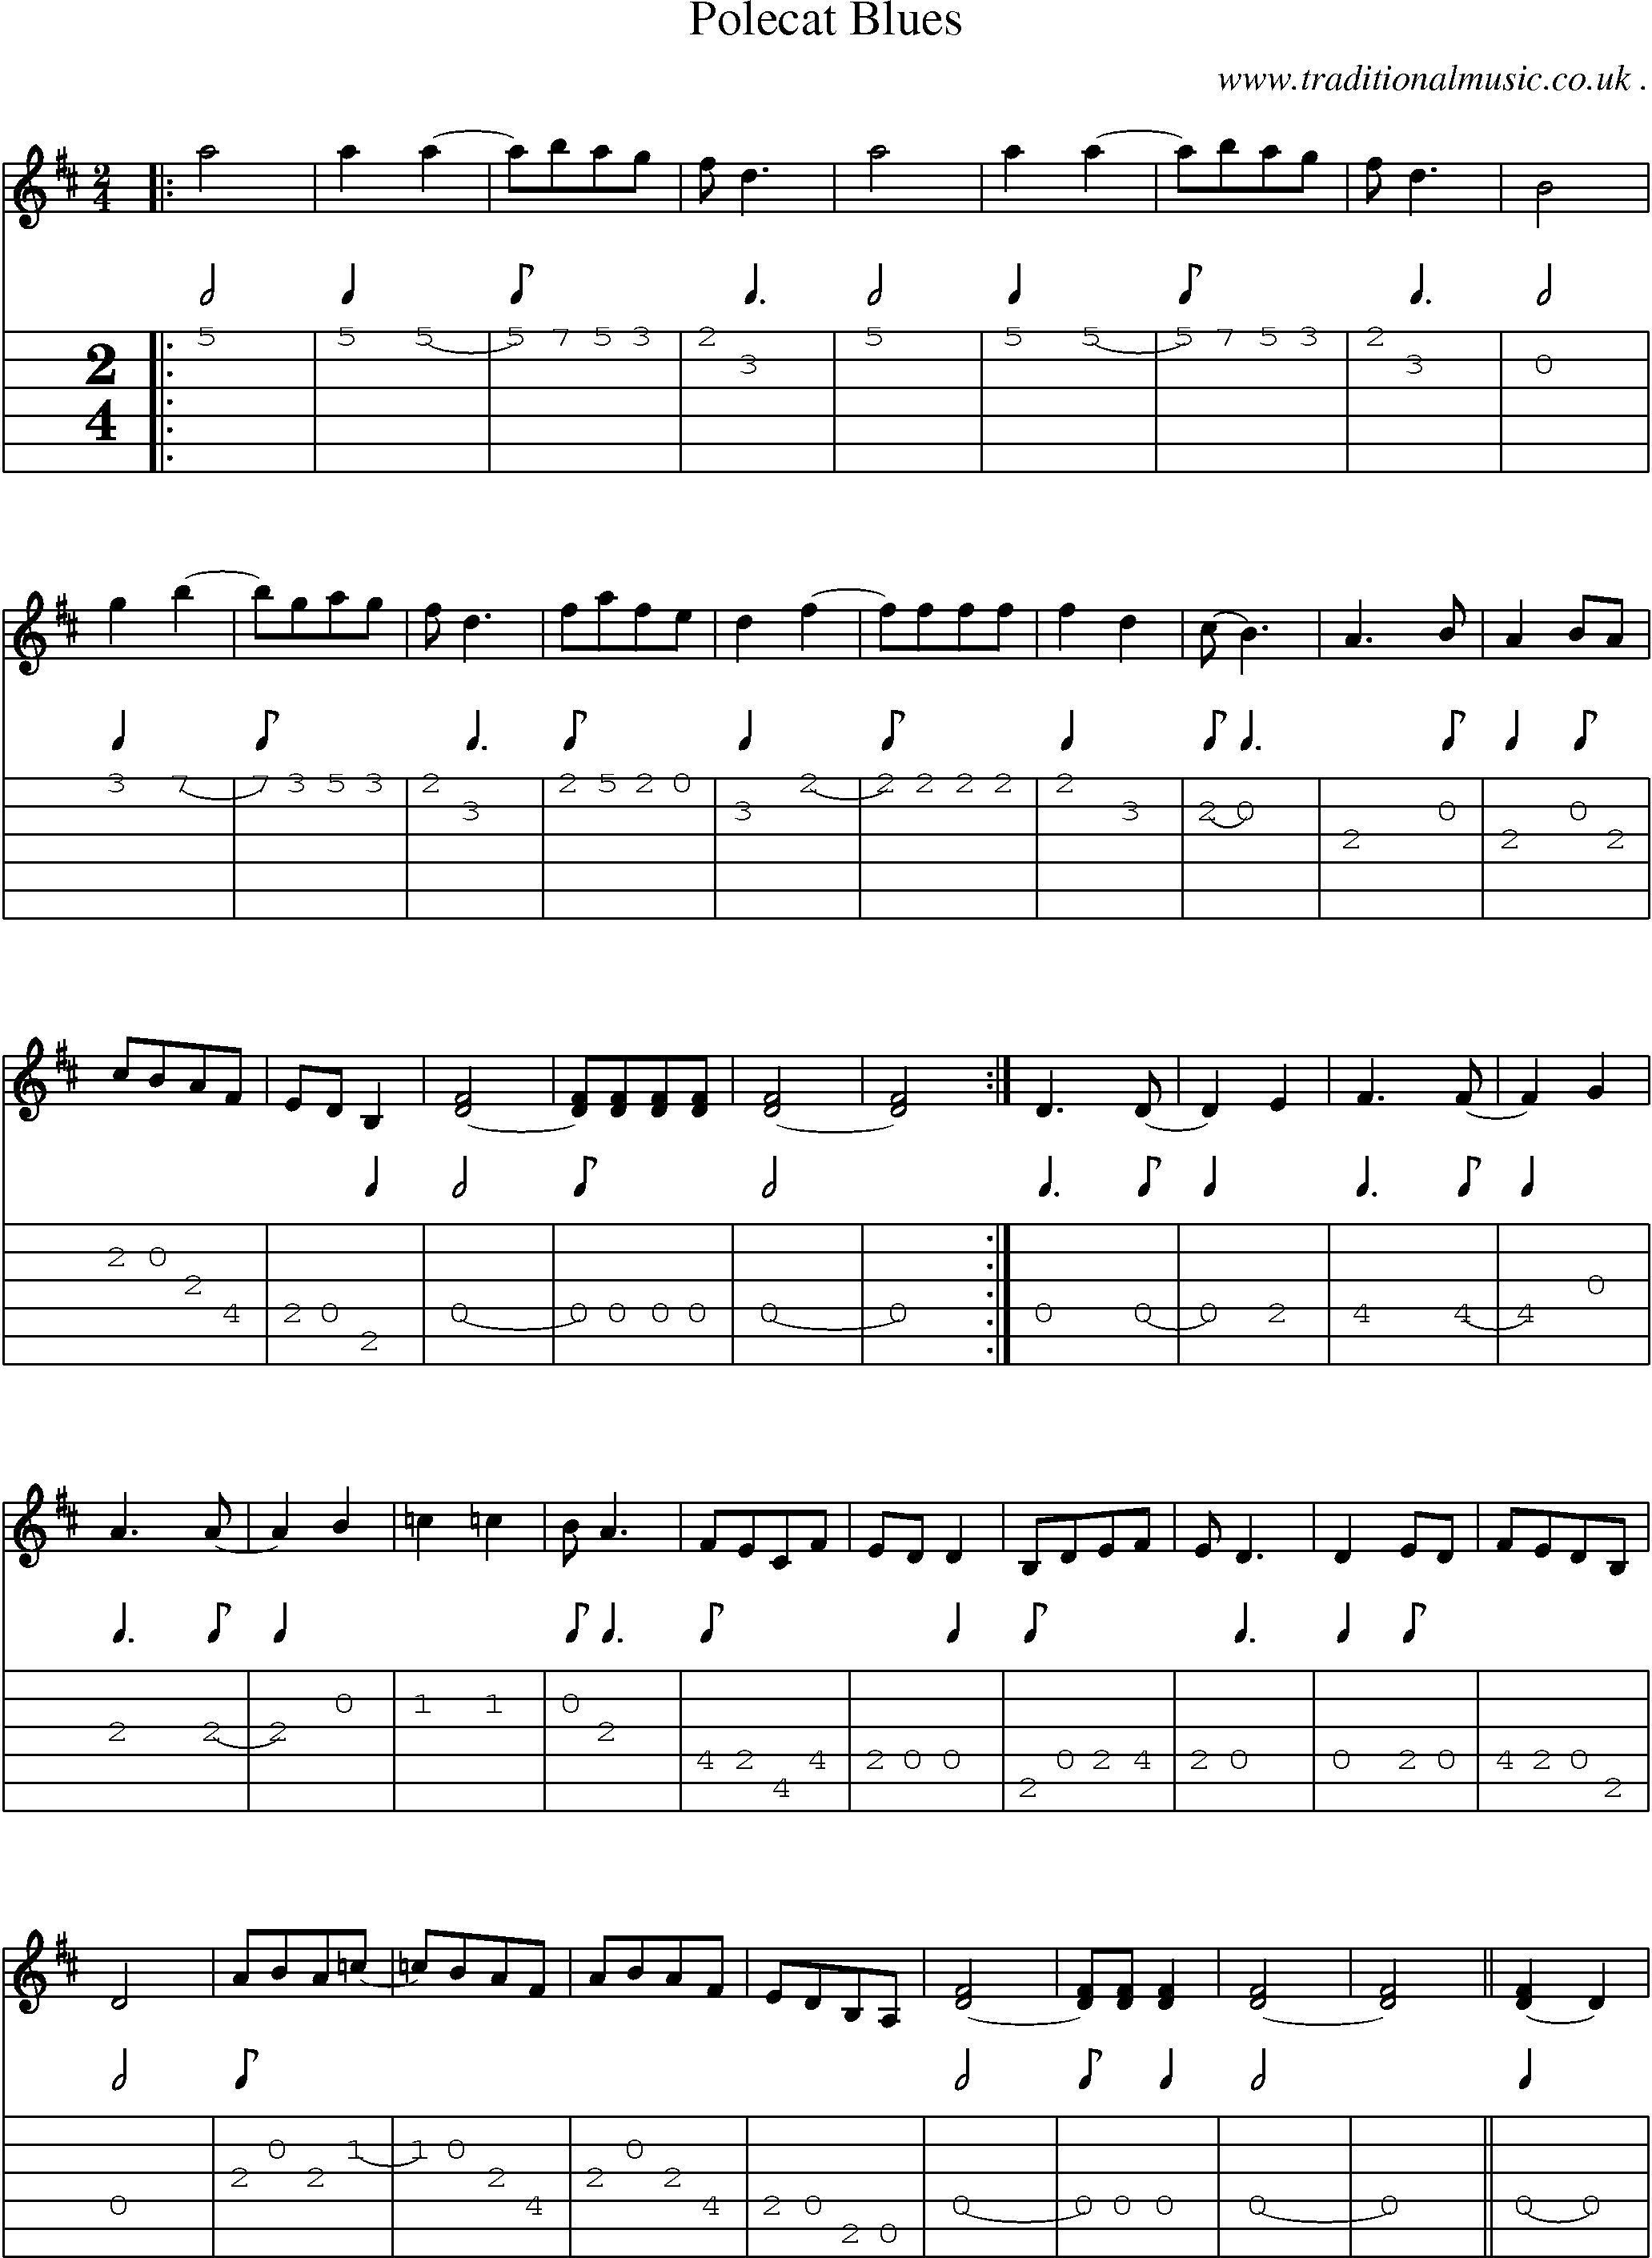 Music Score and Guitar Tabs for Polecat Blues